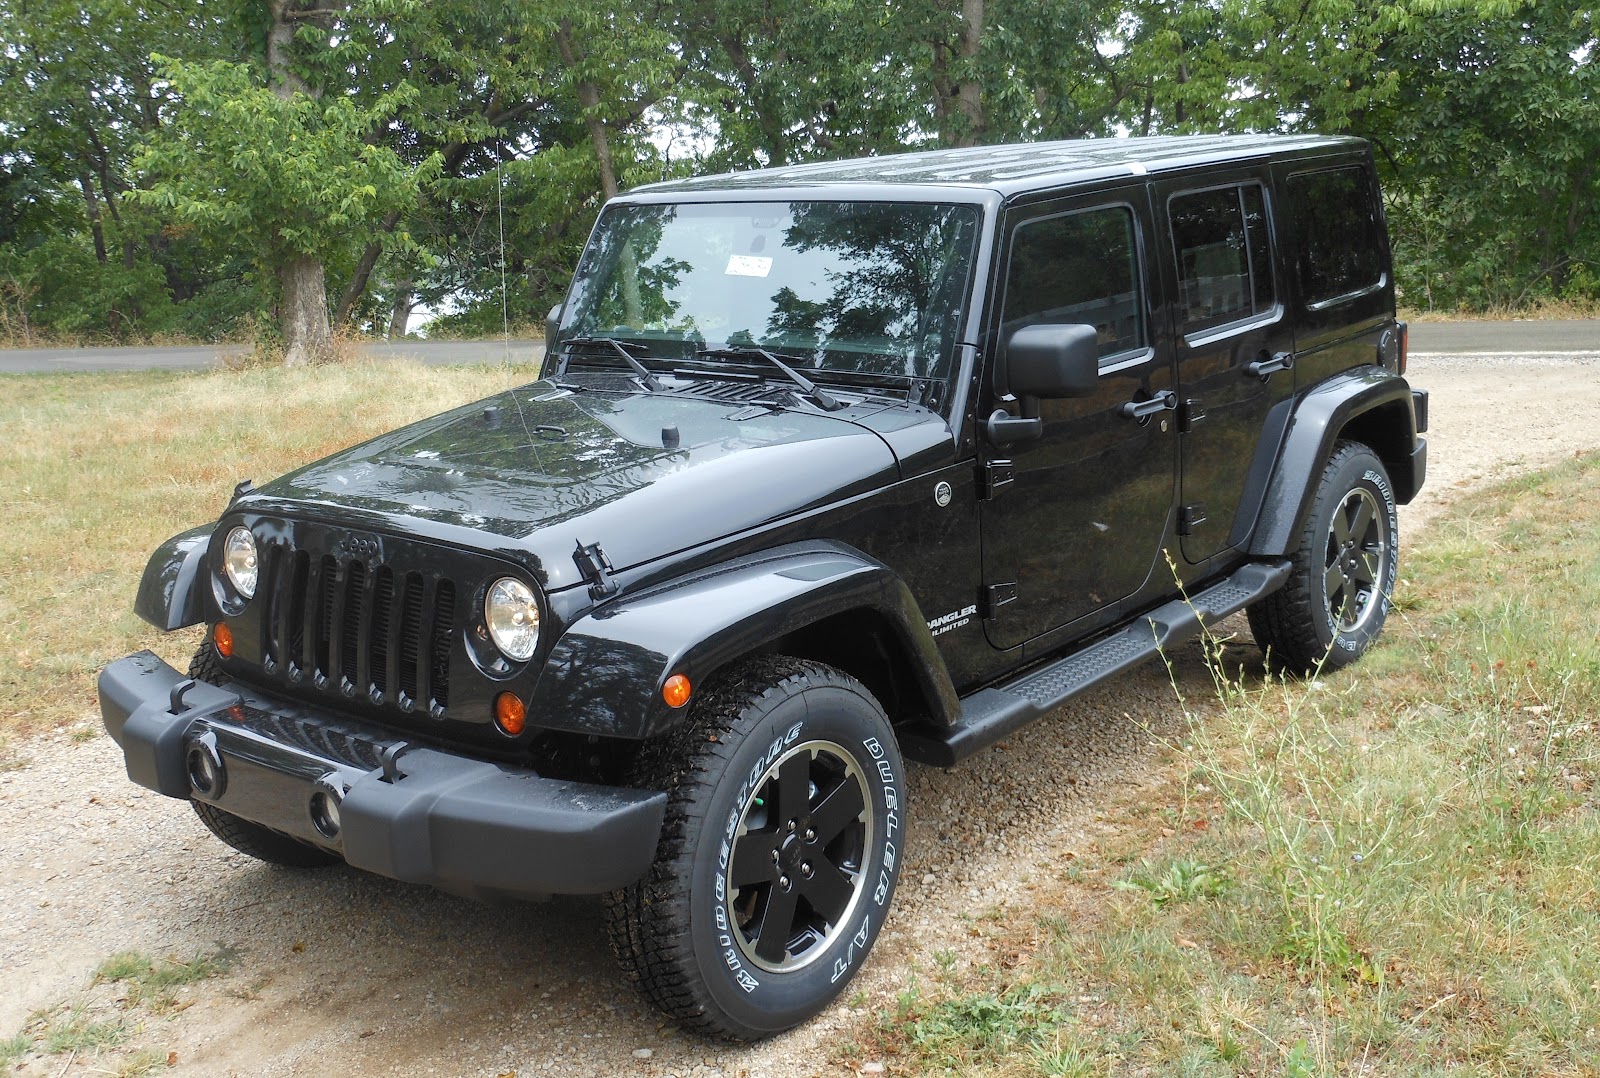 07 Jeep wrangler unlimited mpg #3